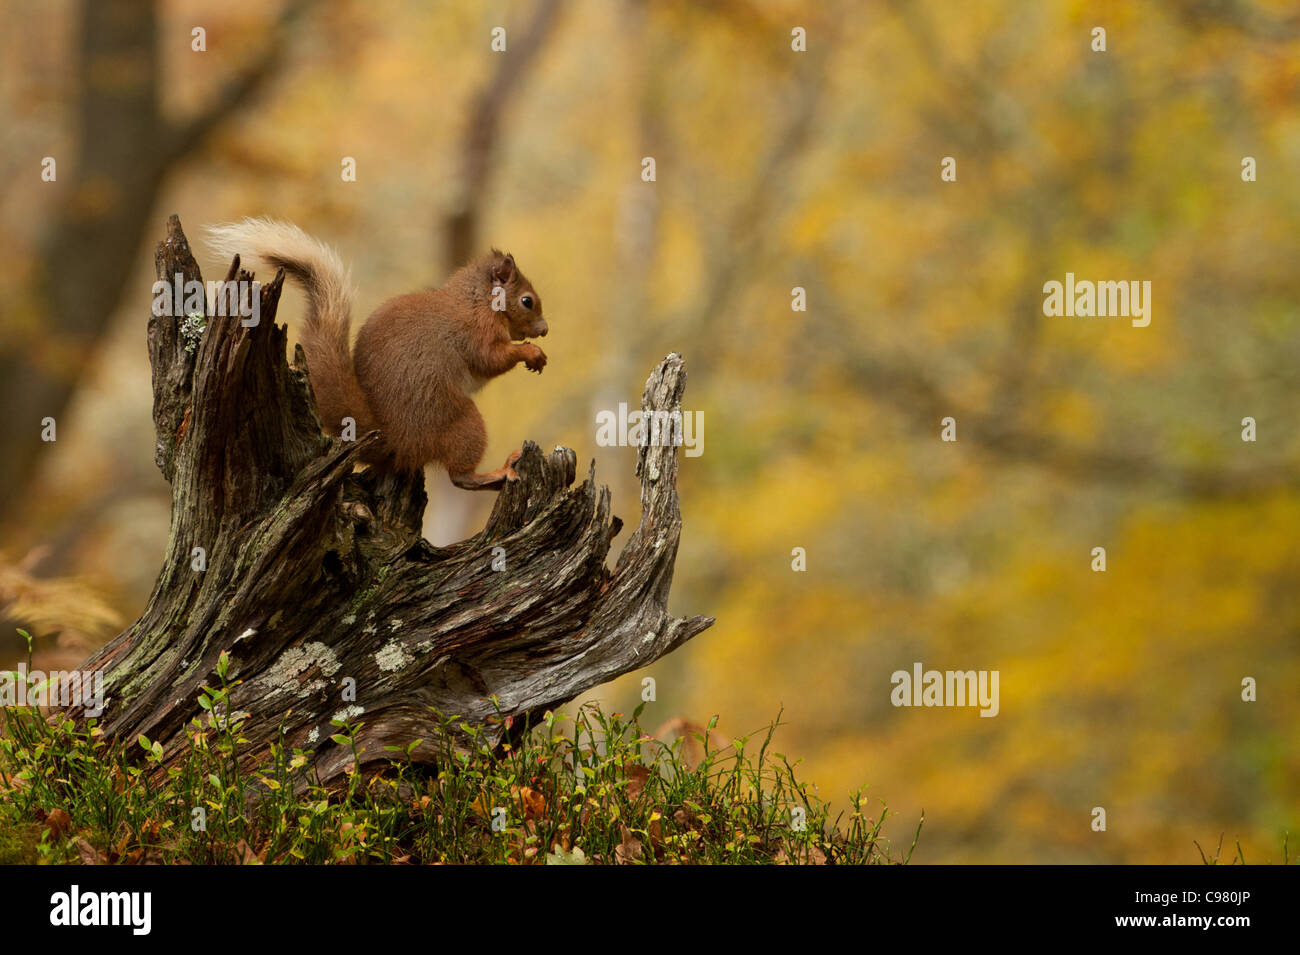 Red Squirrel sitting on tree stump amongst Autumn colored foliage Stock Photo